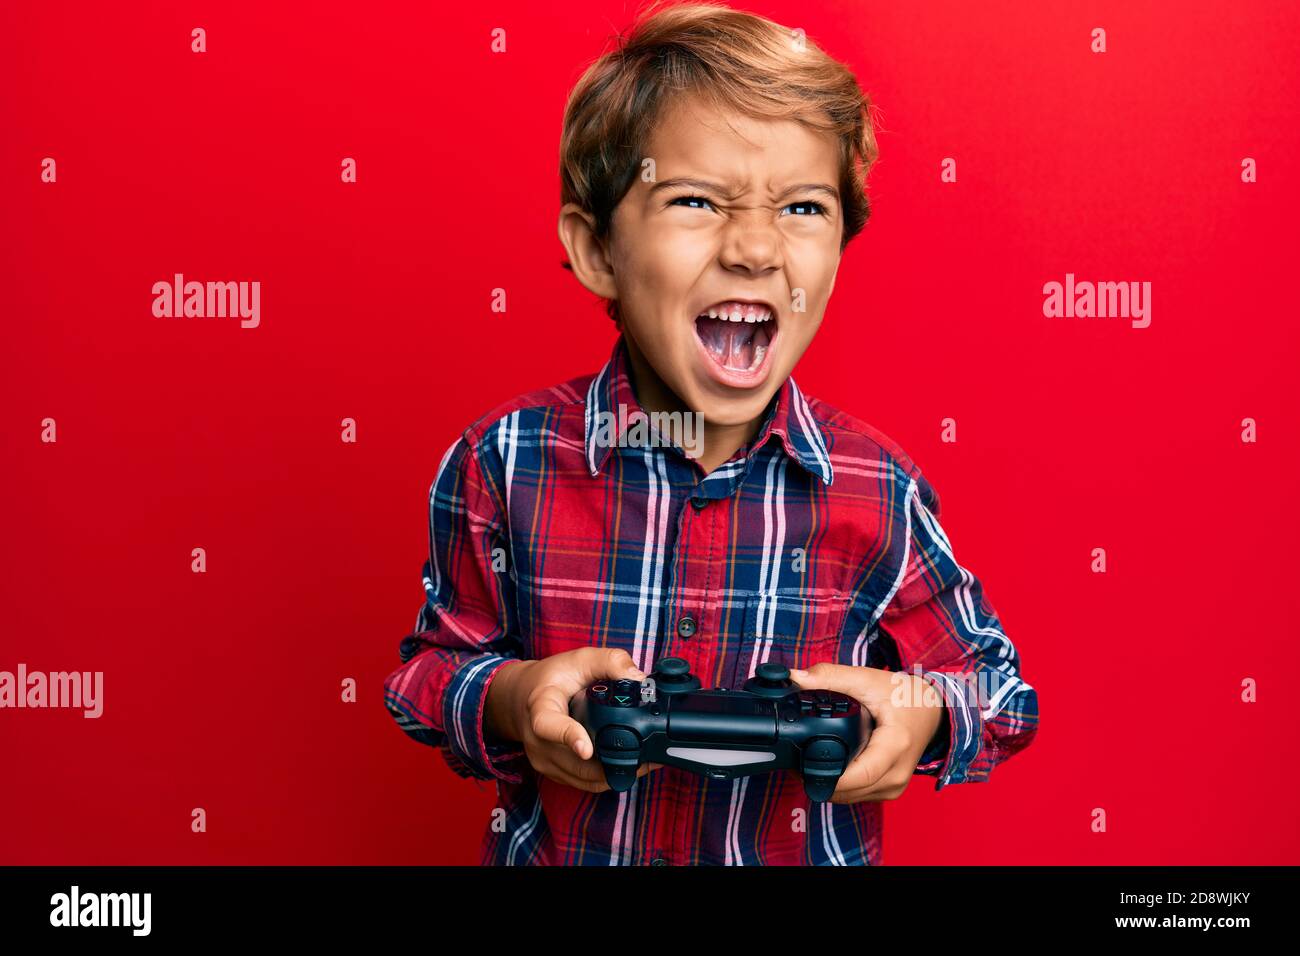 Angry Boy Playing Video Game Stock Illustrations – 49 Angry Boy Playing Video  Game Stock Illustrations, Vectors & Clipart - Dreamstime